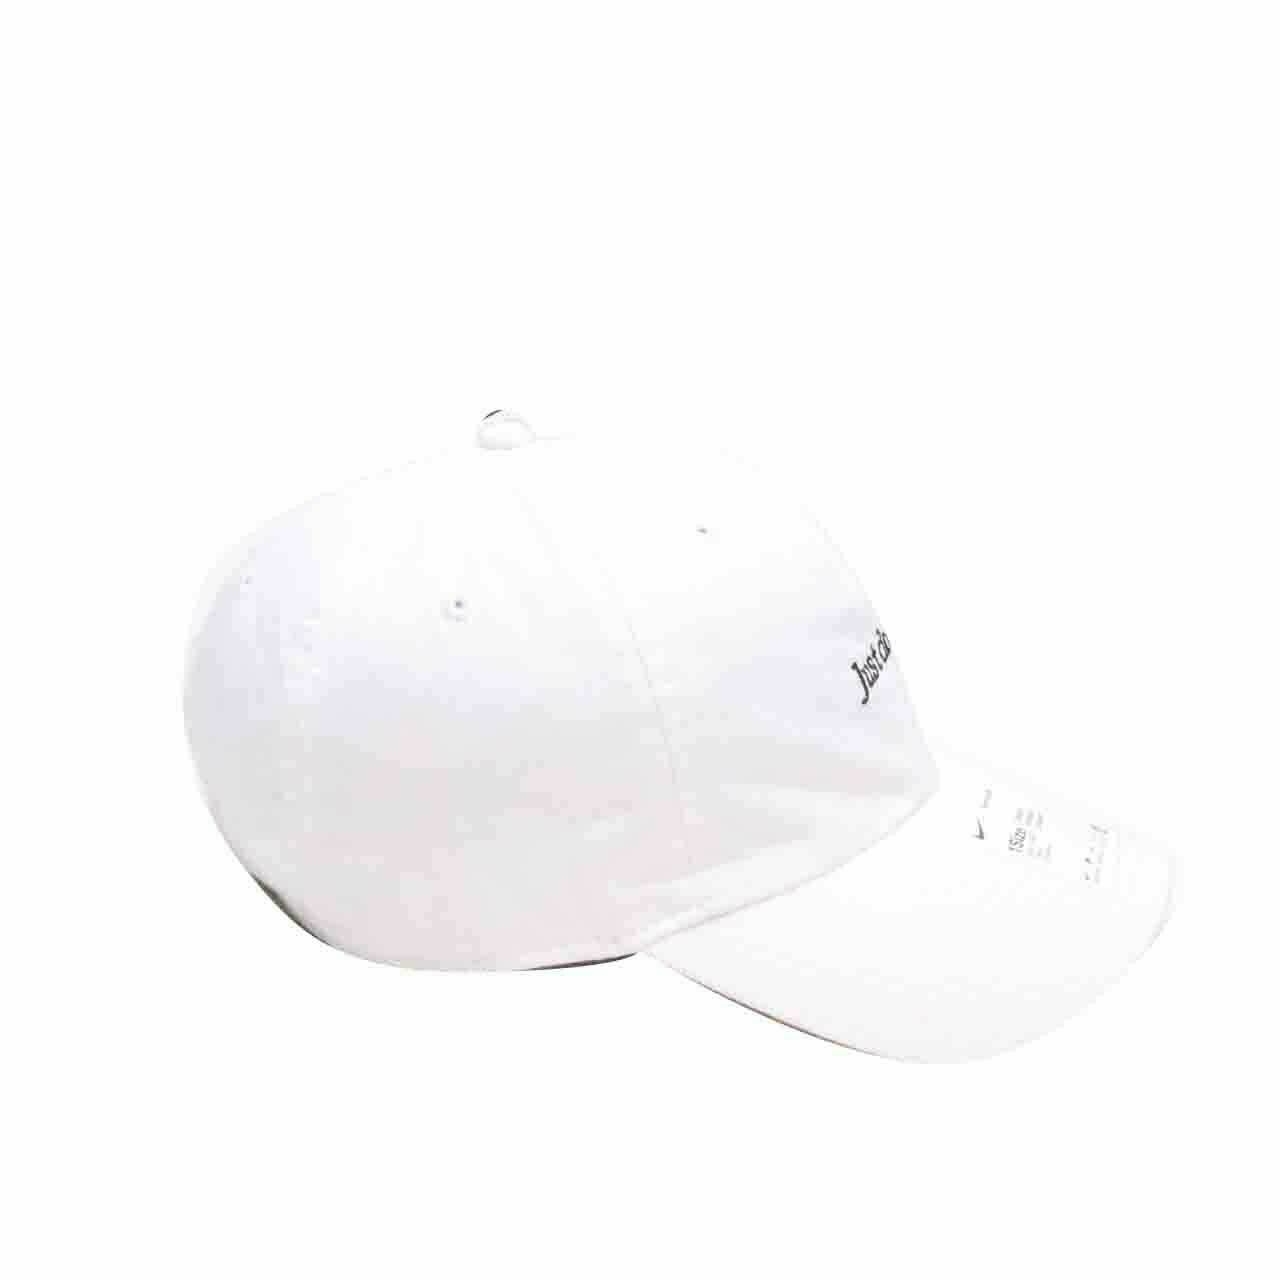 Nike Just Do It Wash Cap